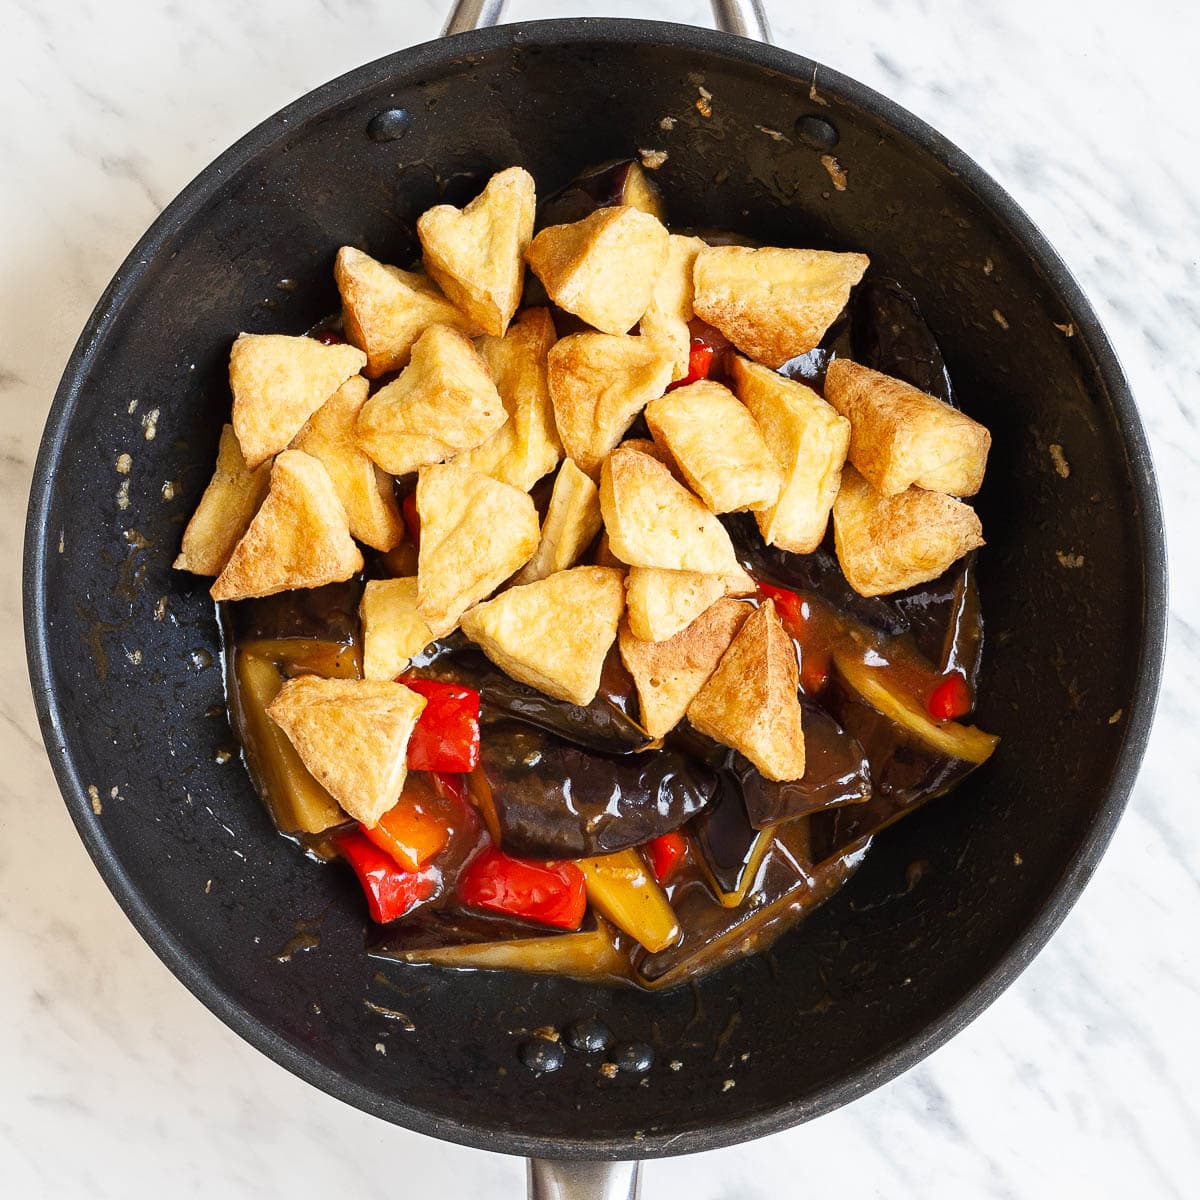 Puffy tofu triangles, eggplant slices and red pepper chunks in a wok are swimming in a brown sauce